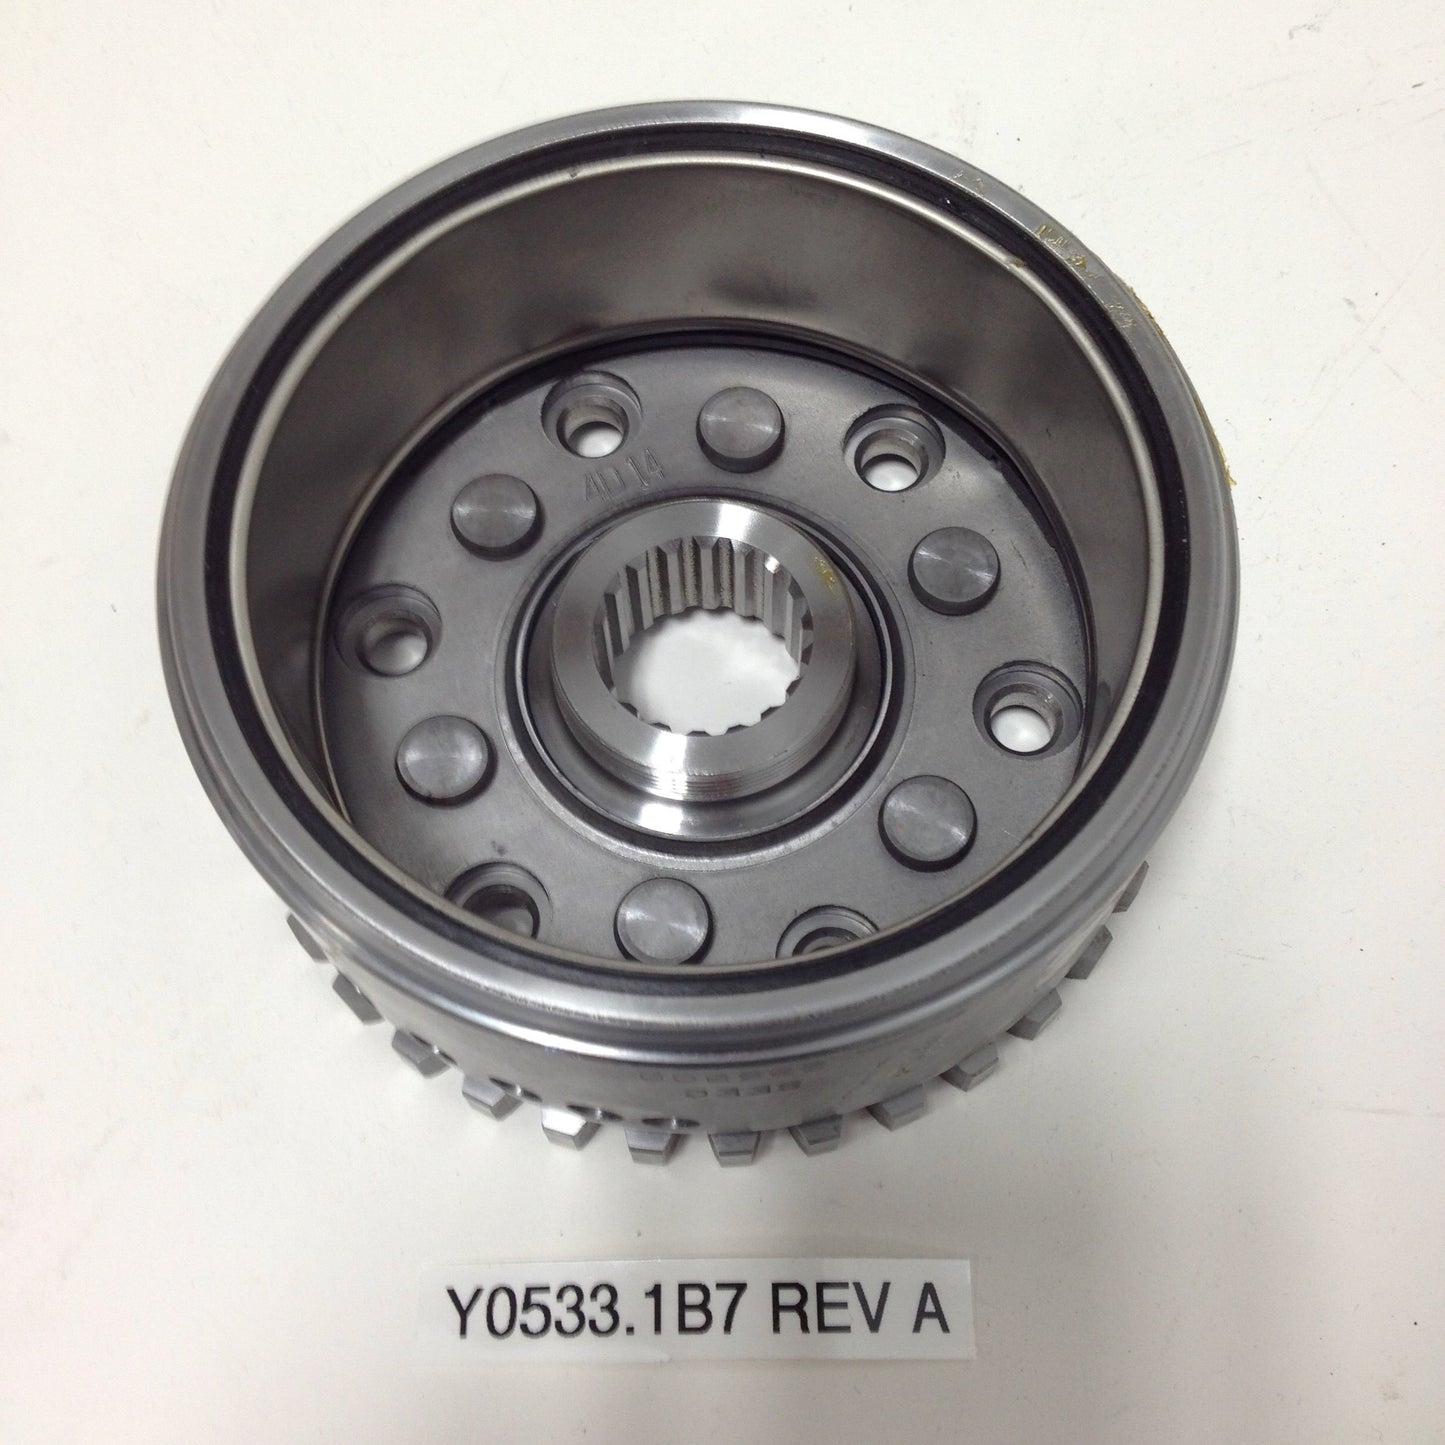 CHARGING ROTOR ASSEMBLY Y0533.1B7 Rev A